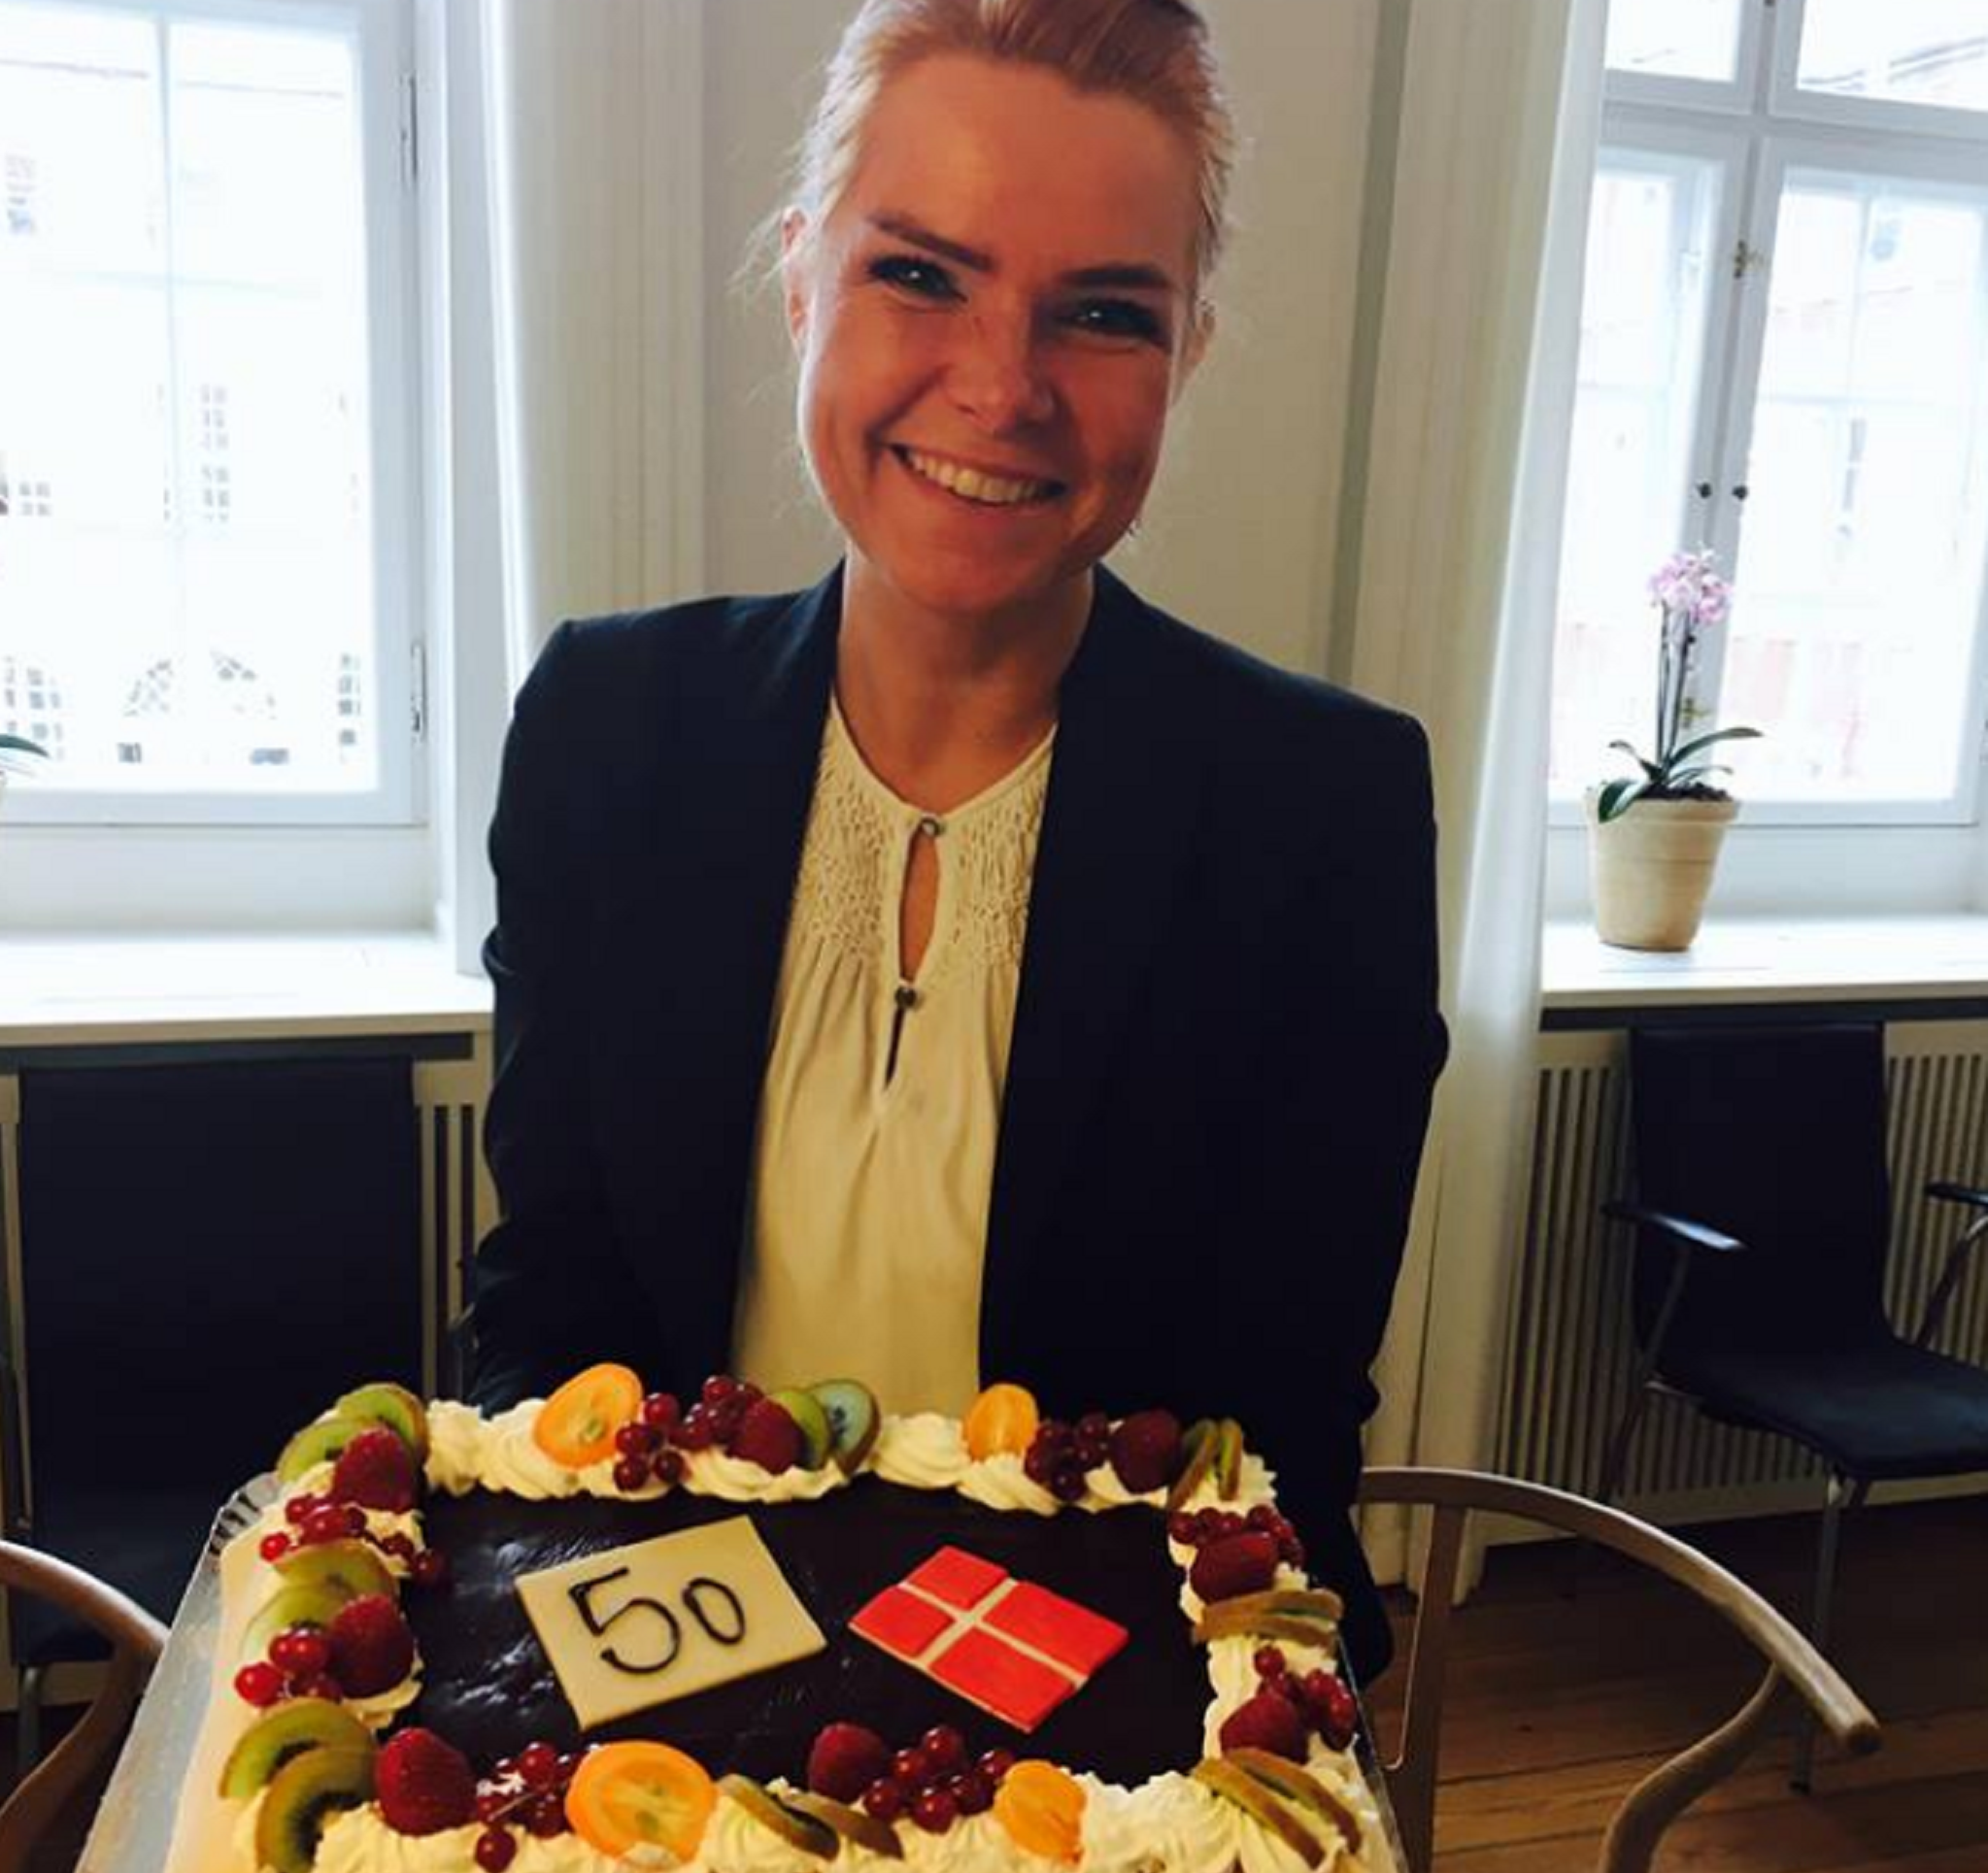 Inger Støjberg posted the photo to celebrate the 50th amendment to tighten immigration controls being ratified